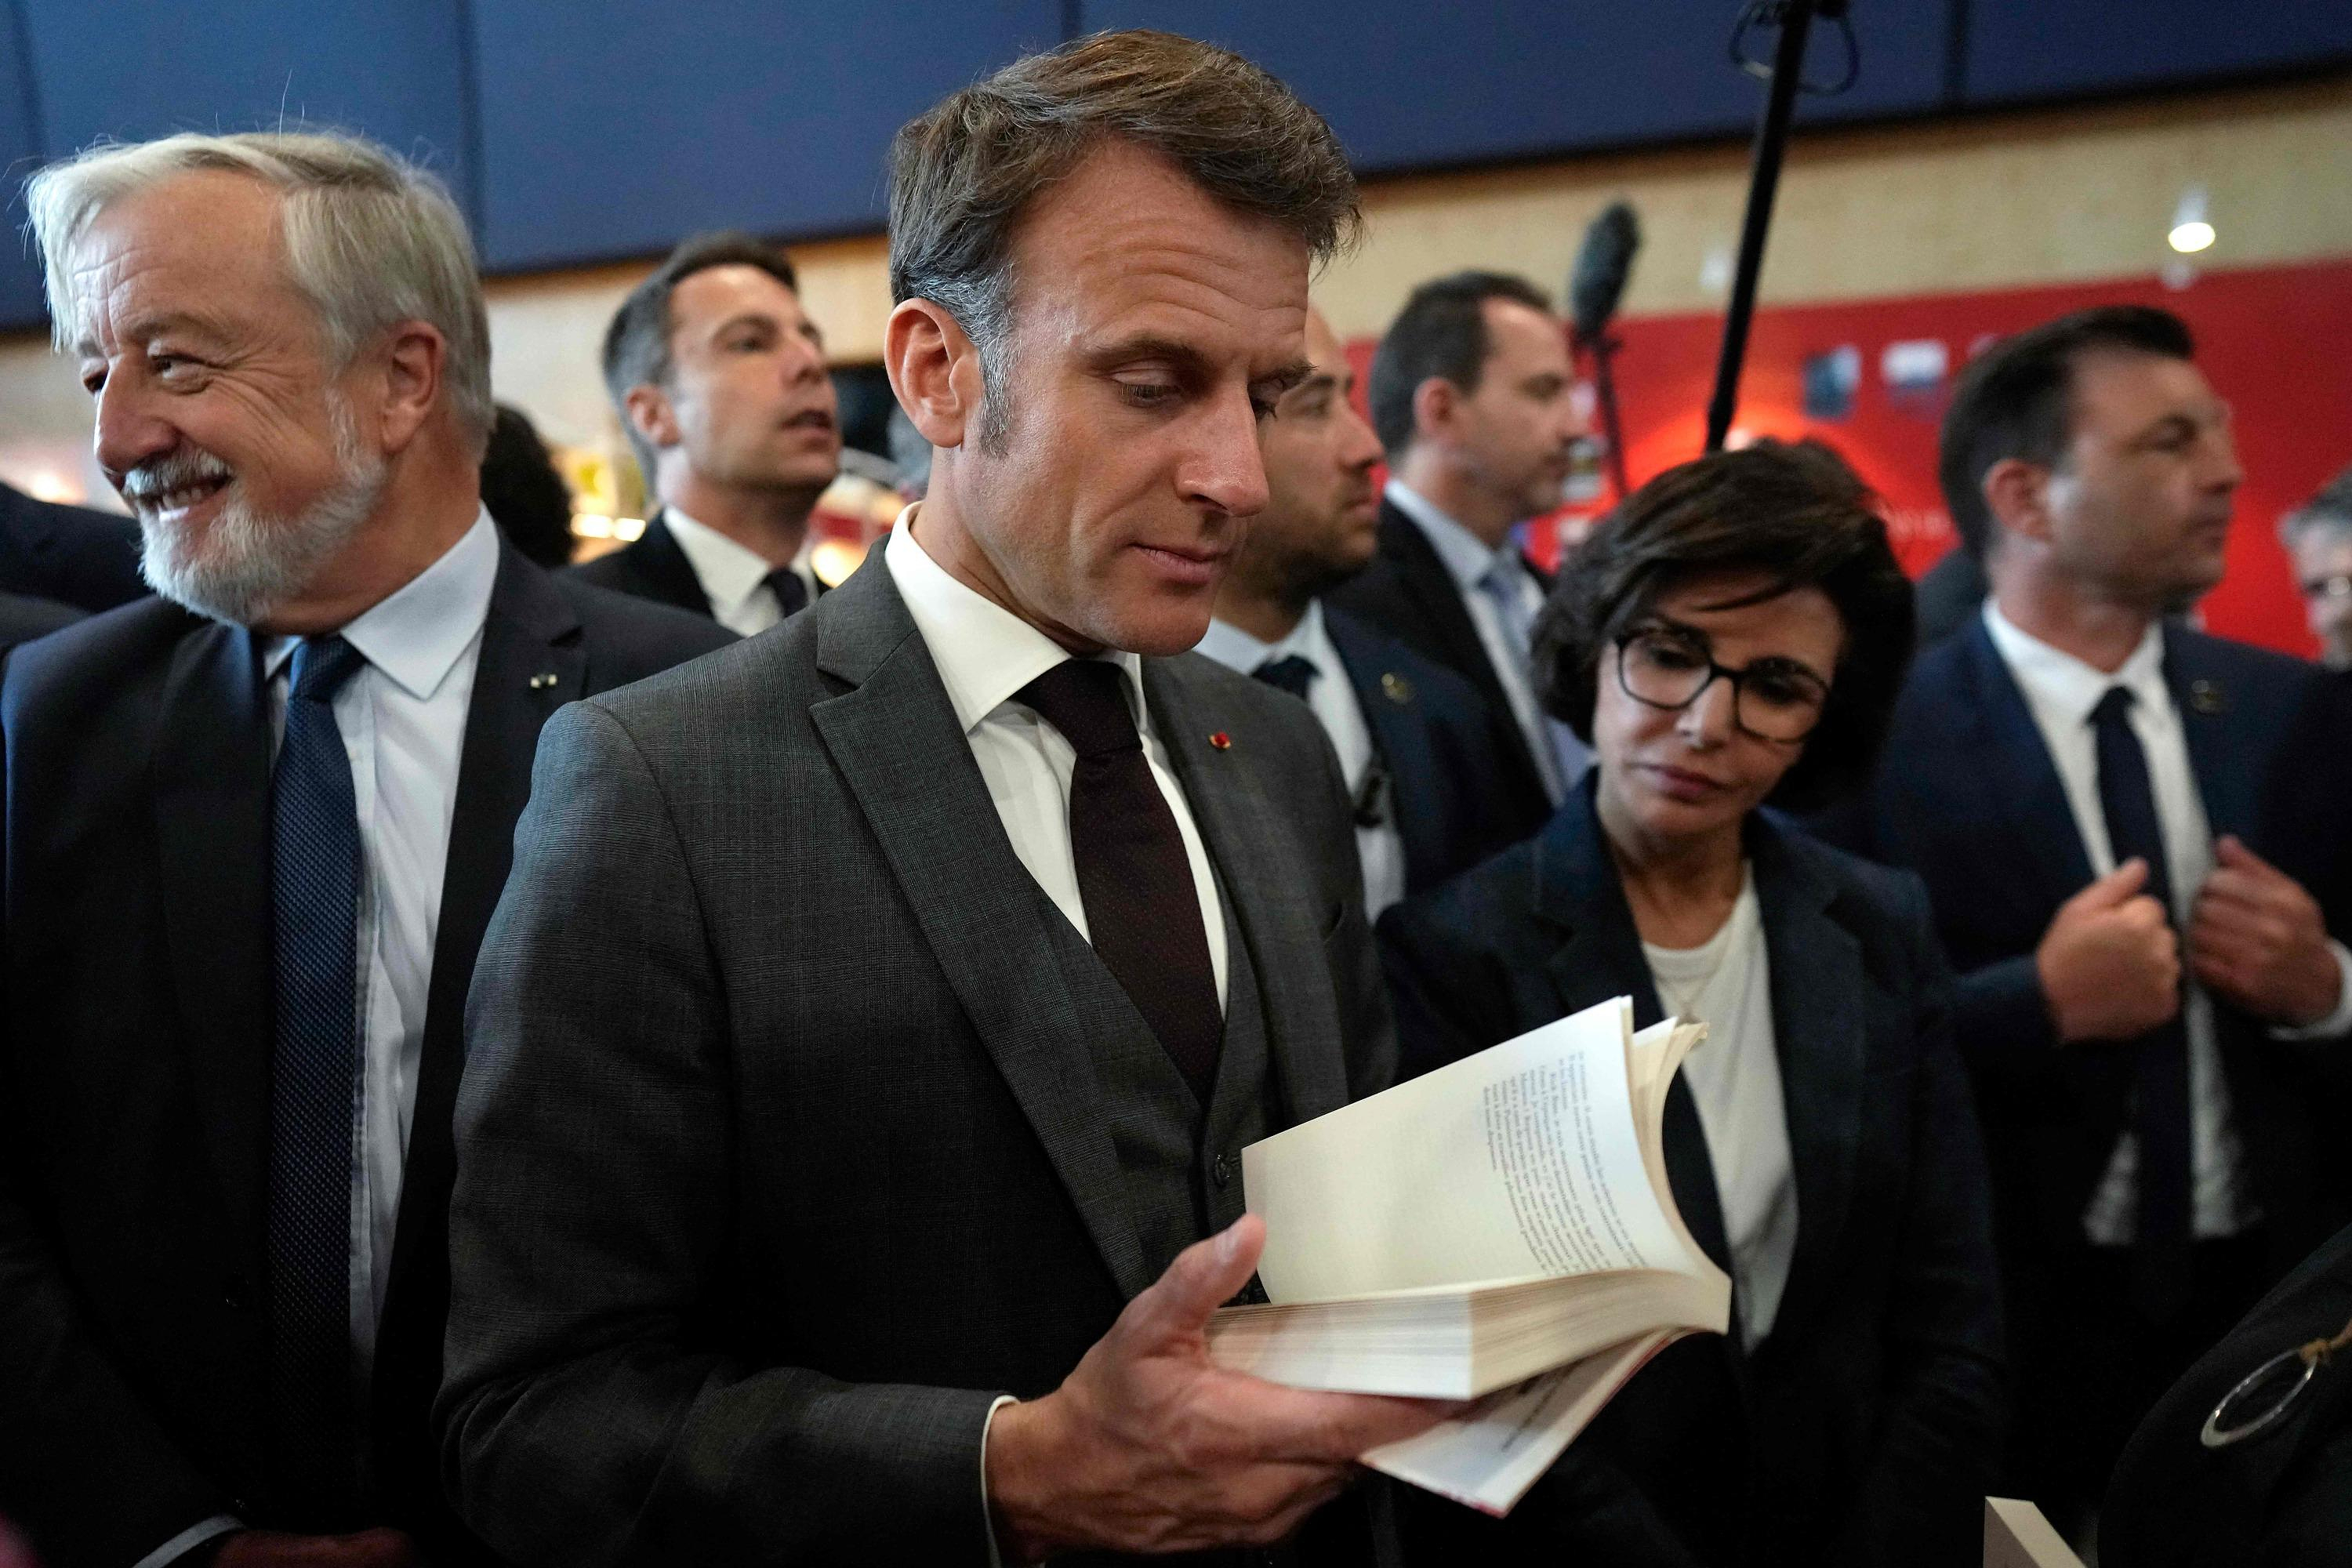 Taxation of second-hand books: Bayrou says he “disagrees” with Macron